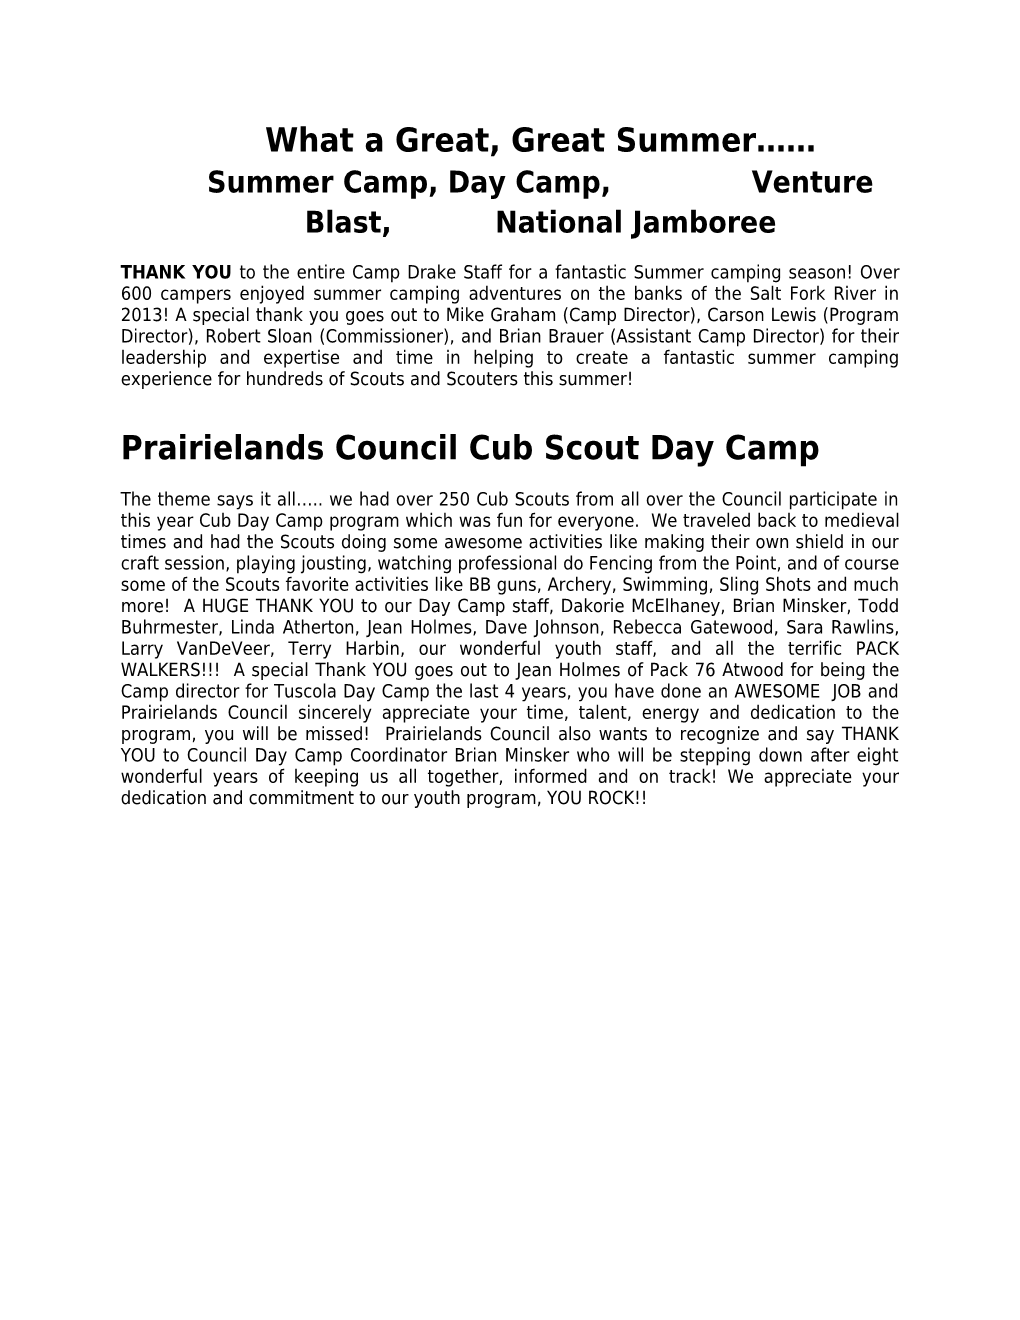 What a Great, Great Summer Summer Camp, Day Camp, Venture Blast, National Jamboree